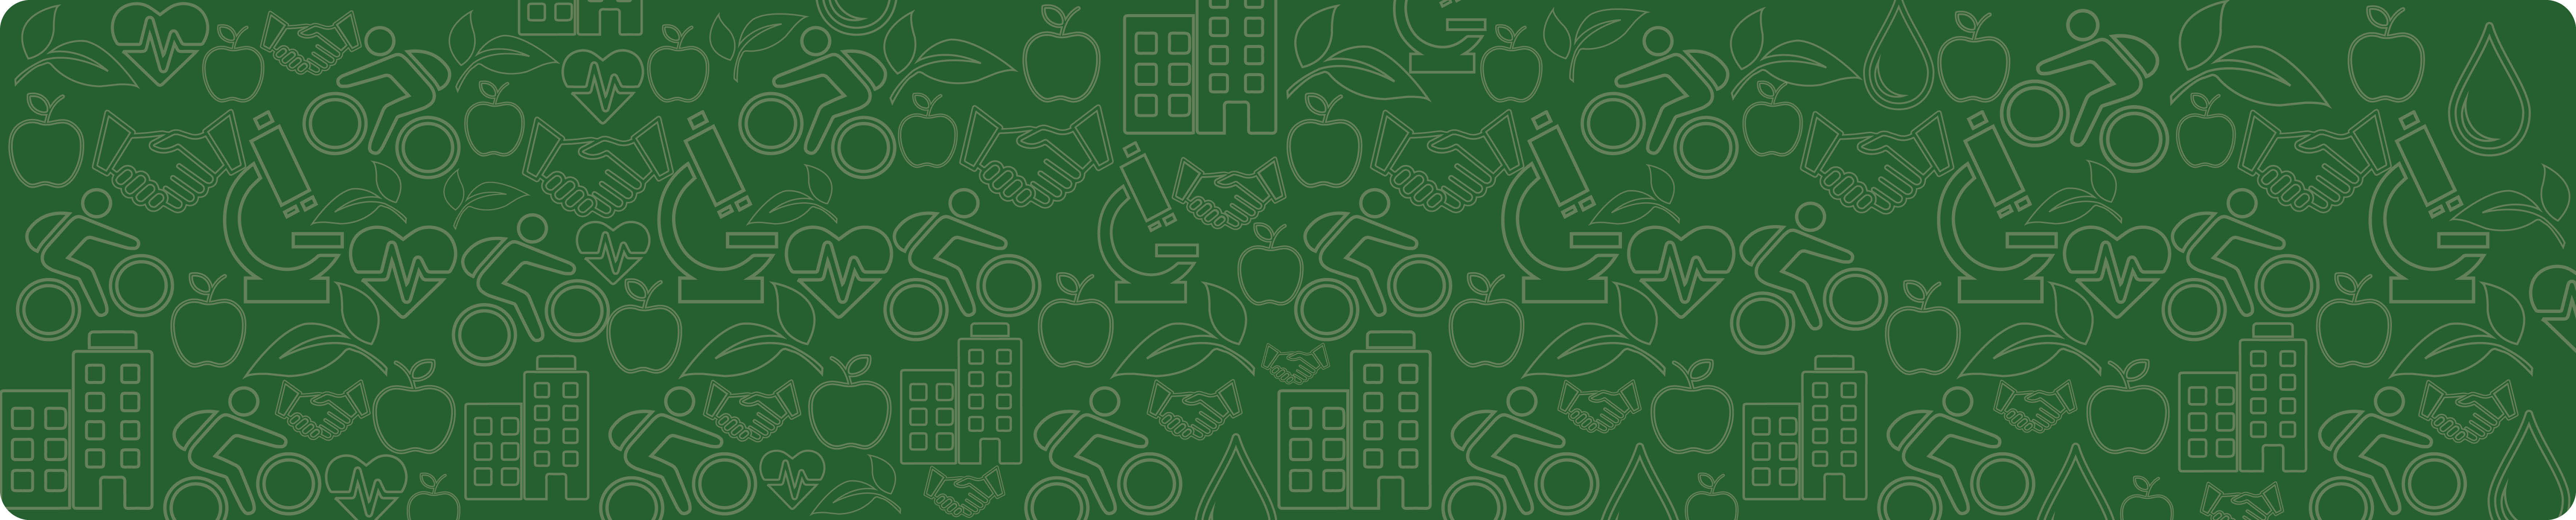 Sustainability icons with green background